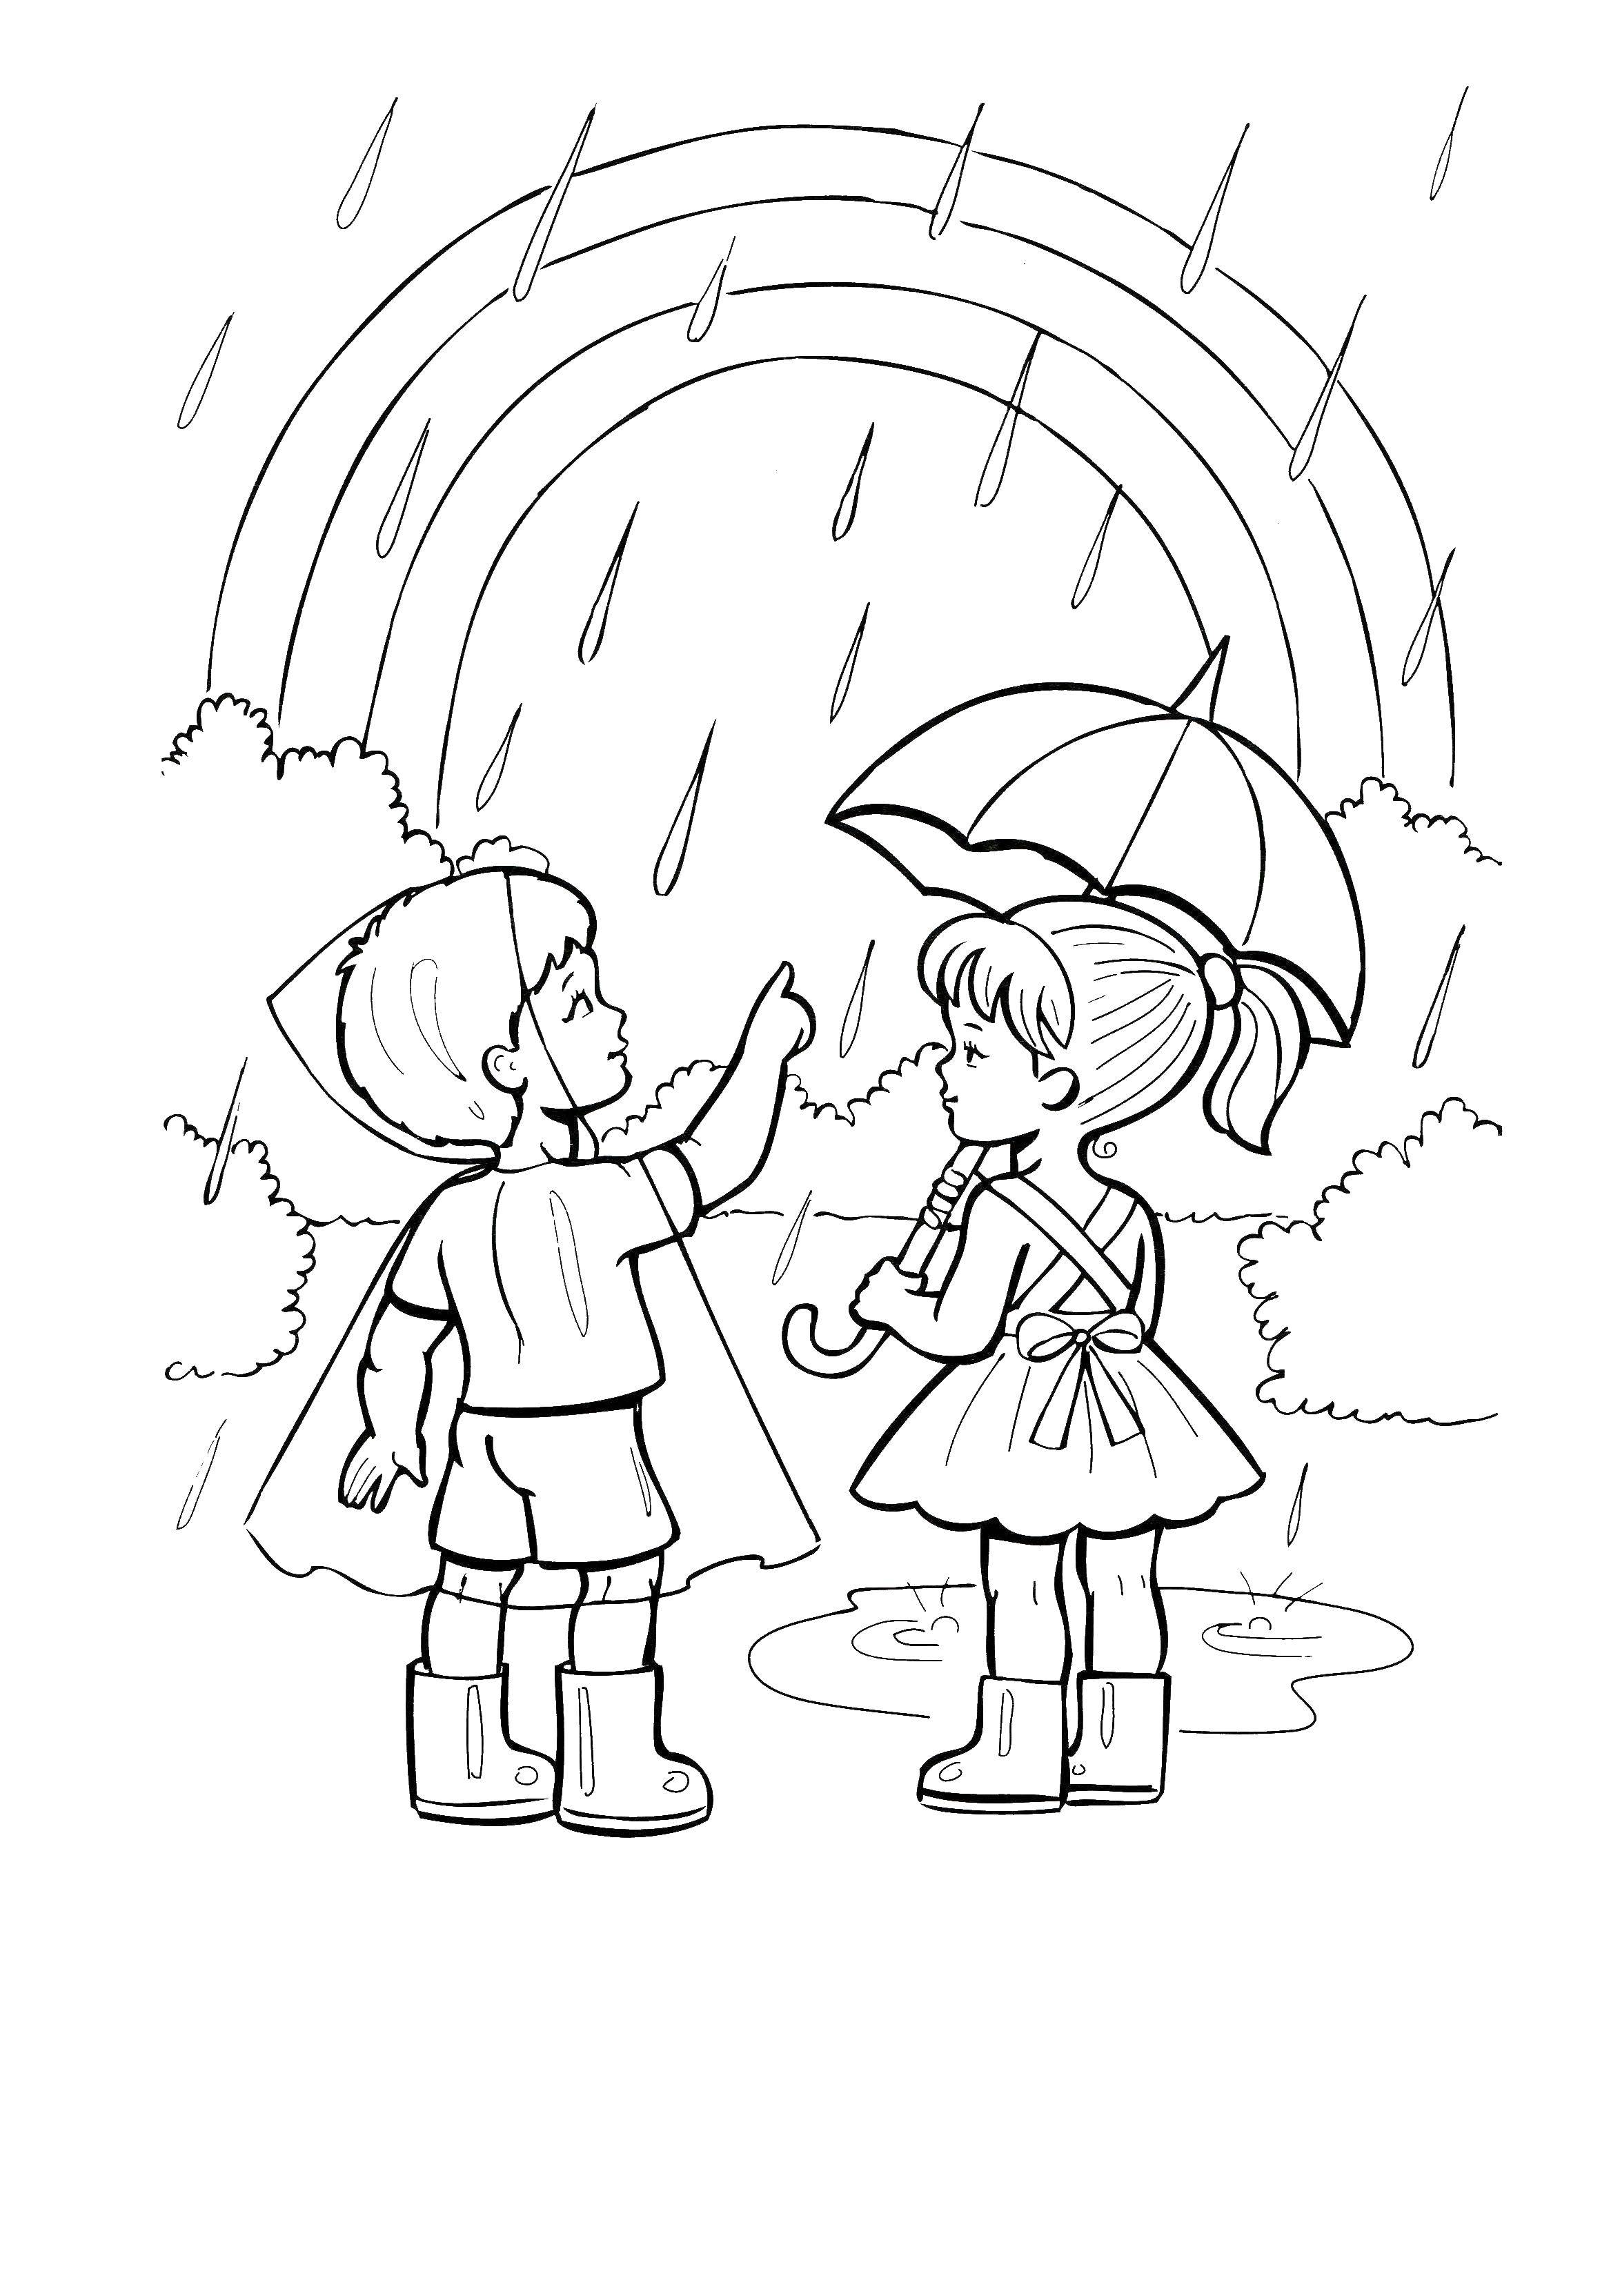 Coloring Children look at a rainbow during the rain. Category Coloring pages for kids. Tags:  Rain, children, joy, rainbow.